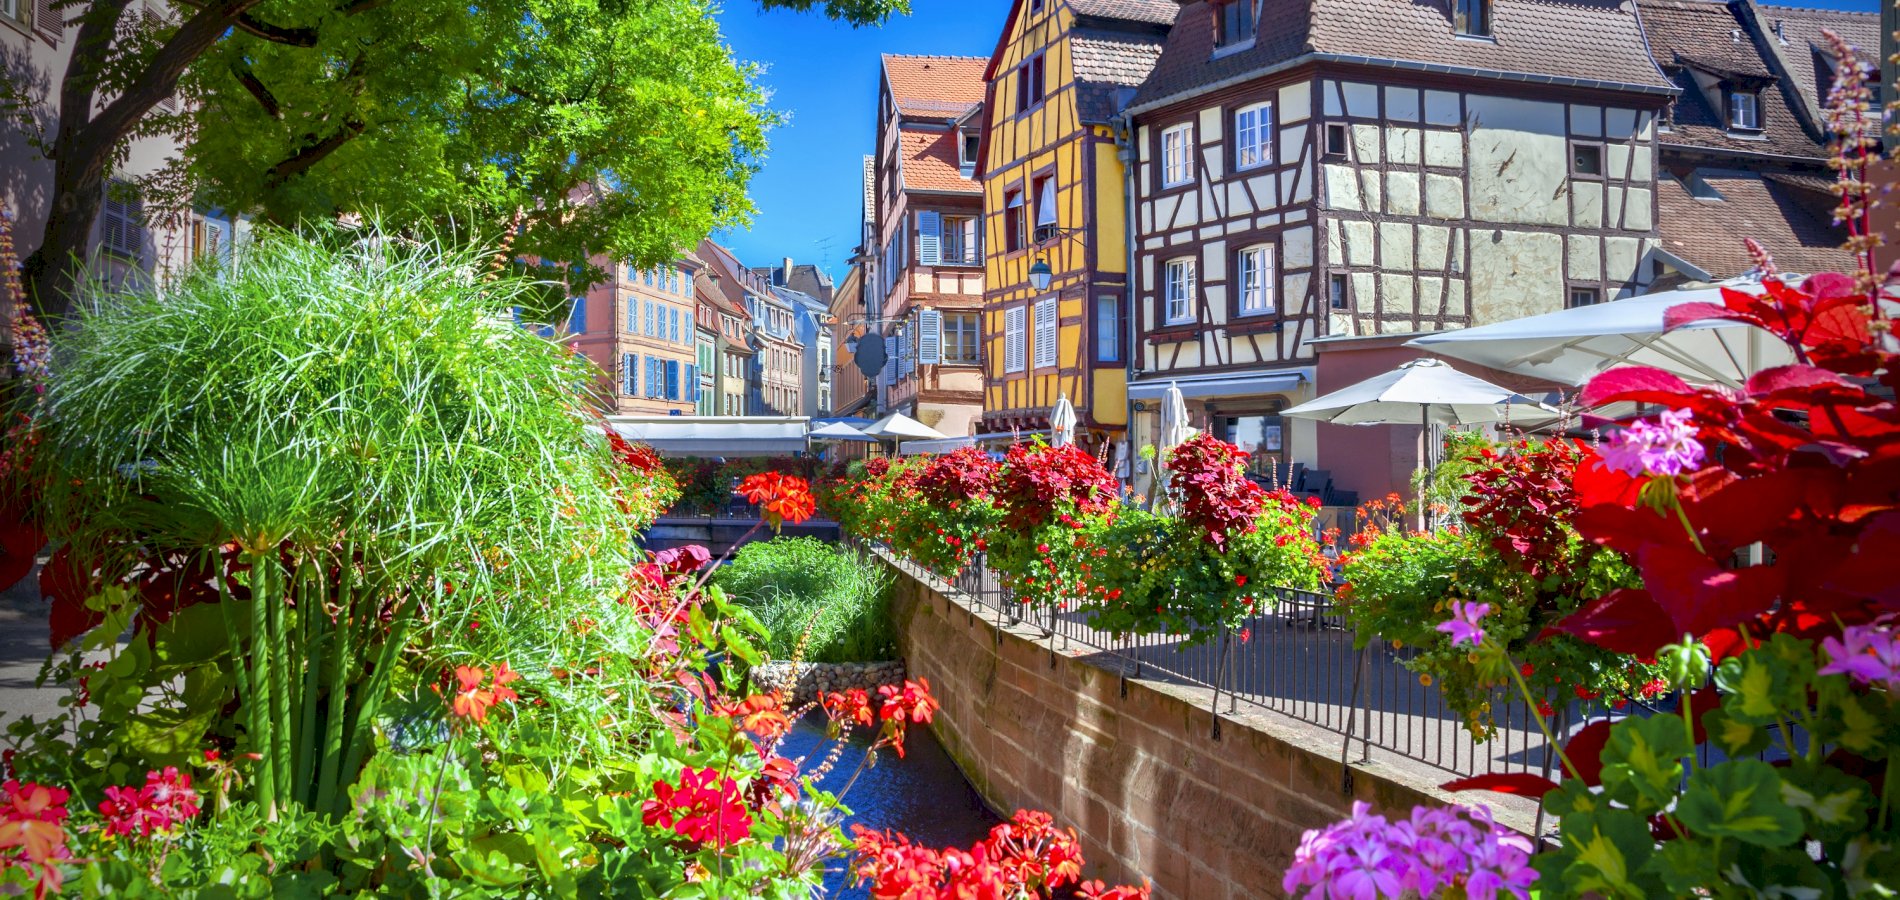 Ophorus Tours - 4 Days Alsace Shared Travel Package - 5* Hotel Option